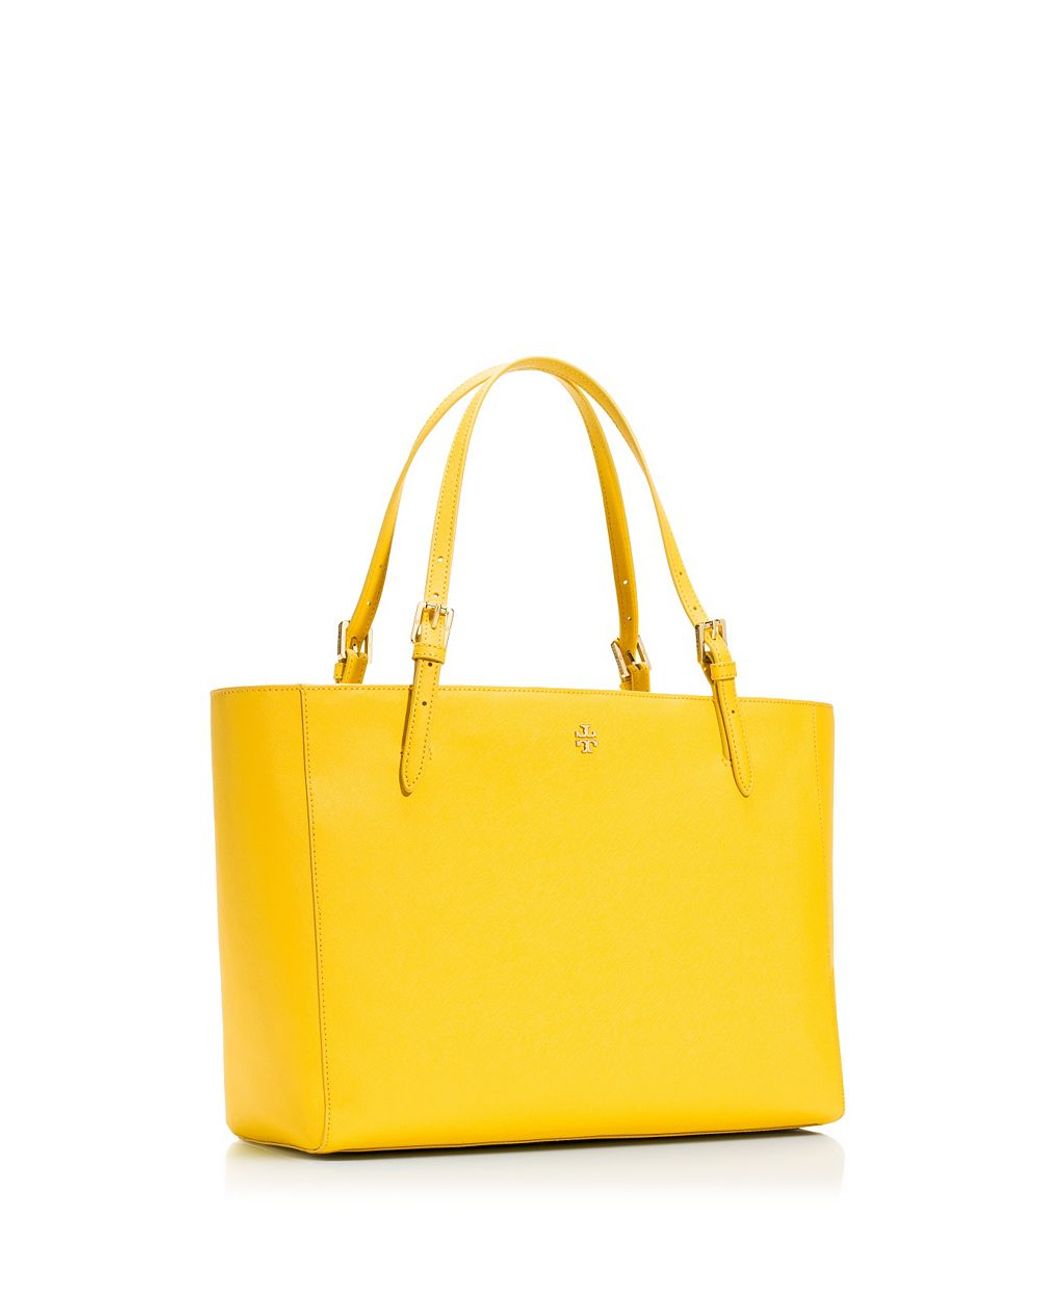 Tory Burch York Buckle Tote in Yellow | Lyst